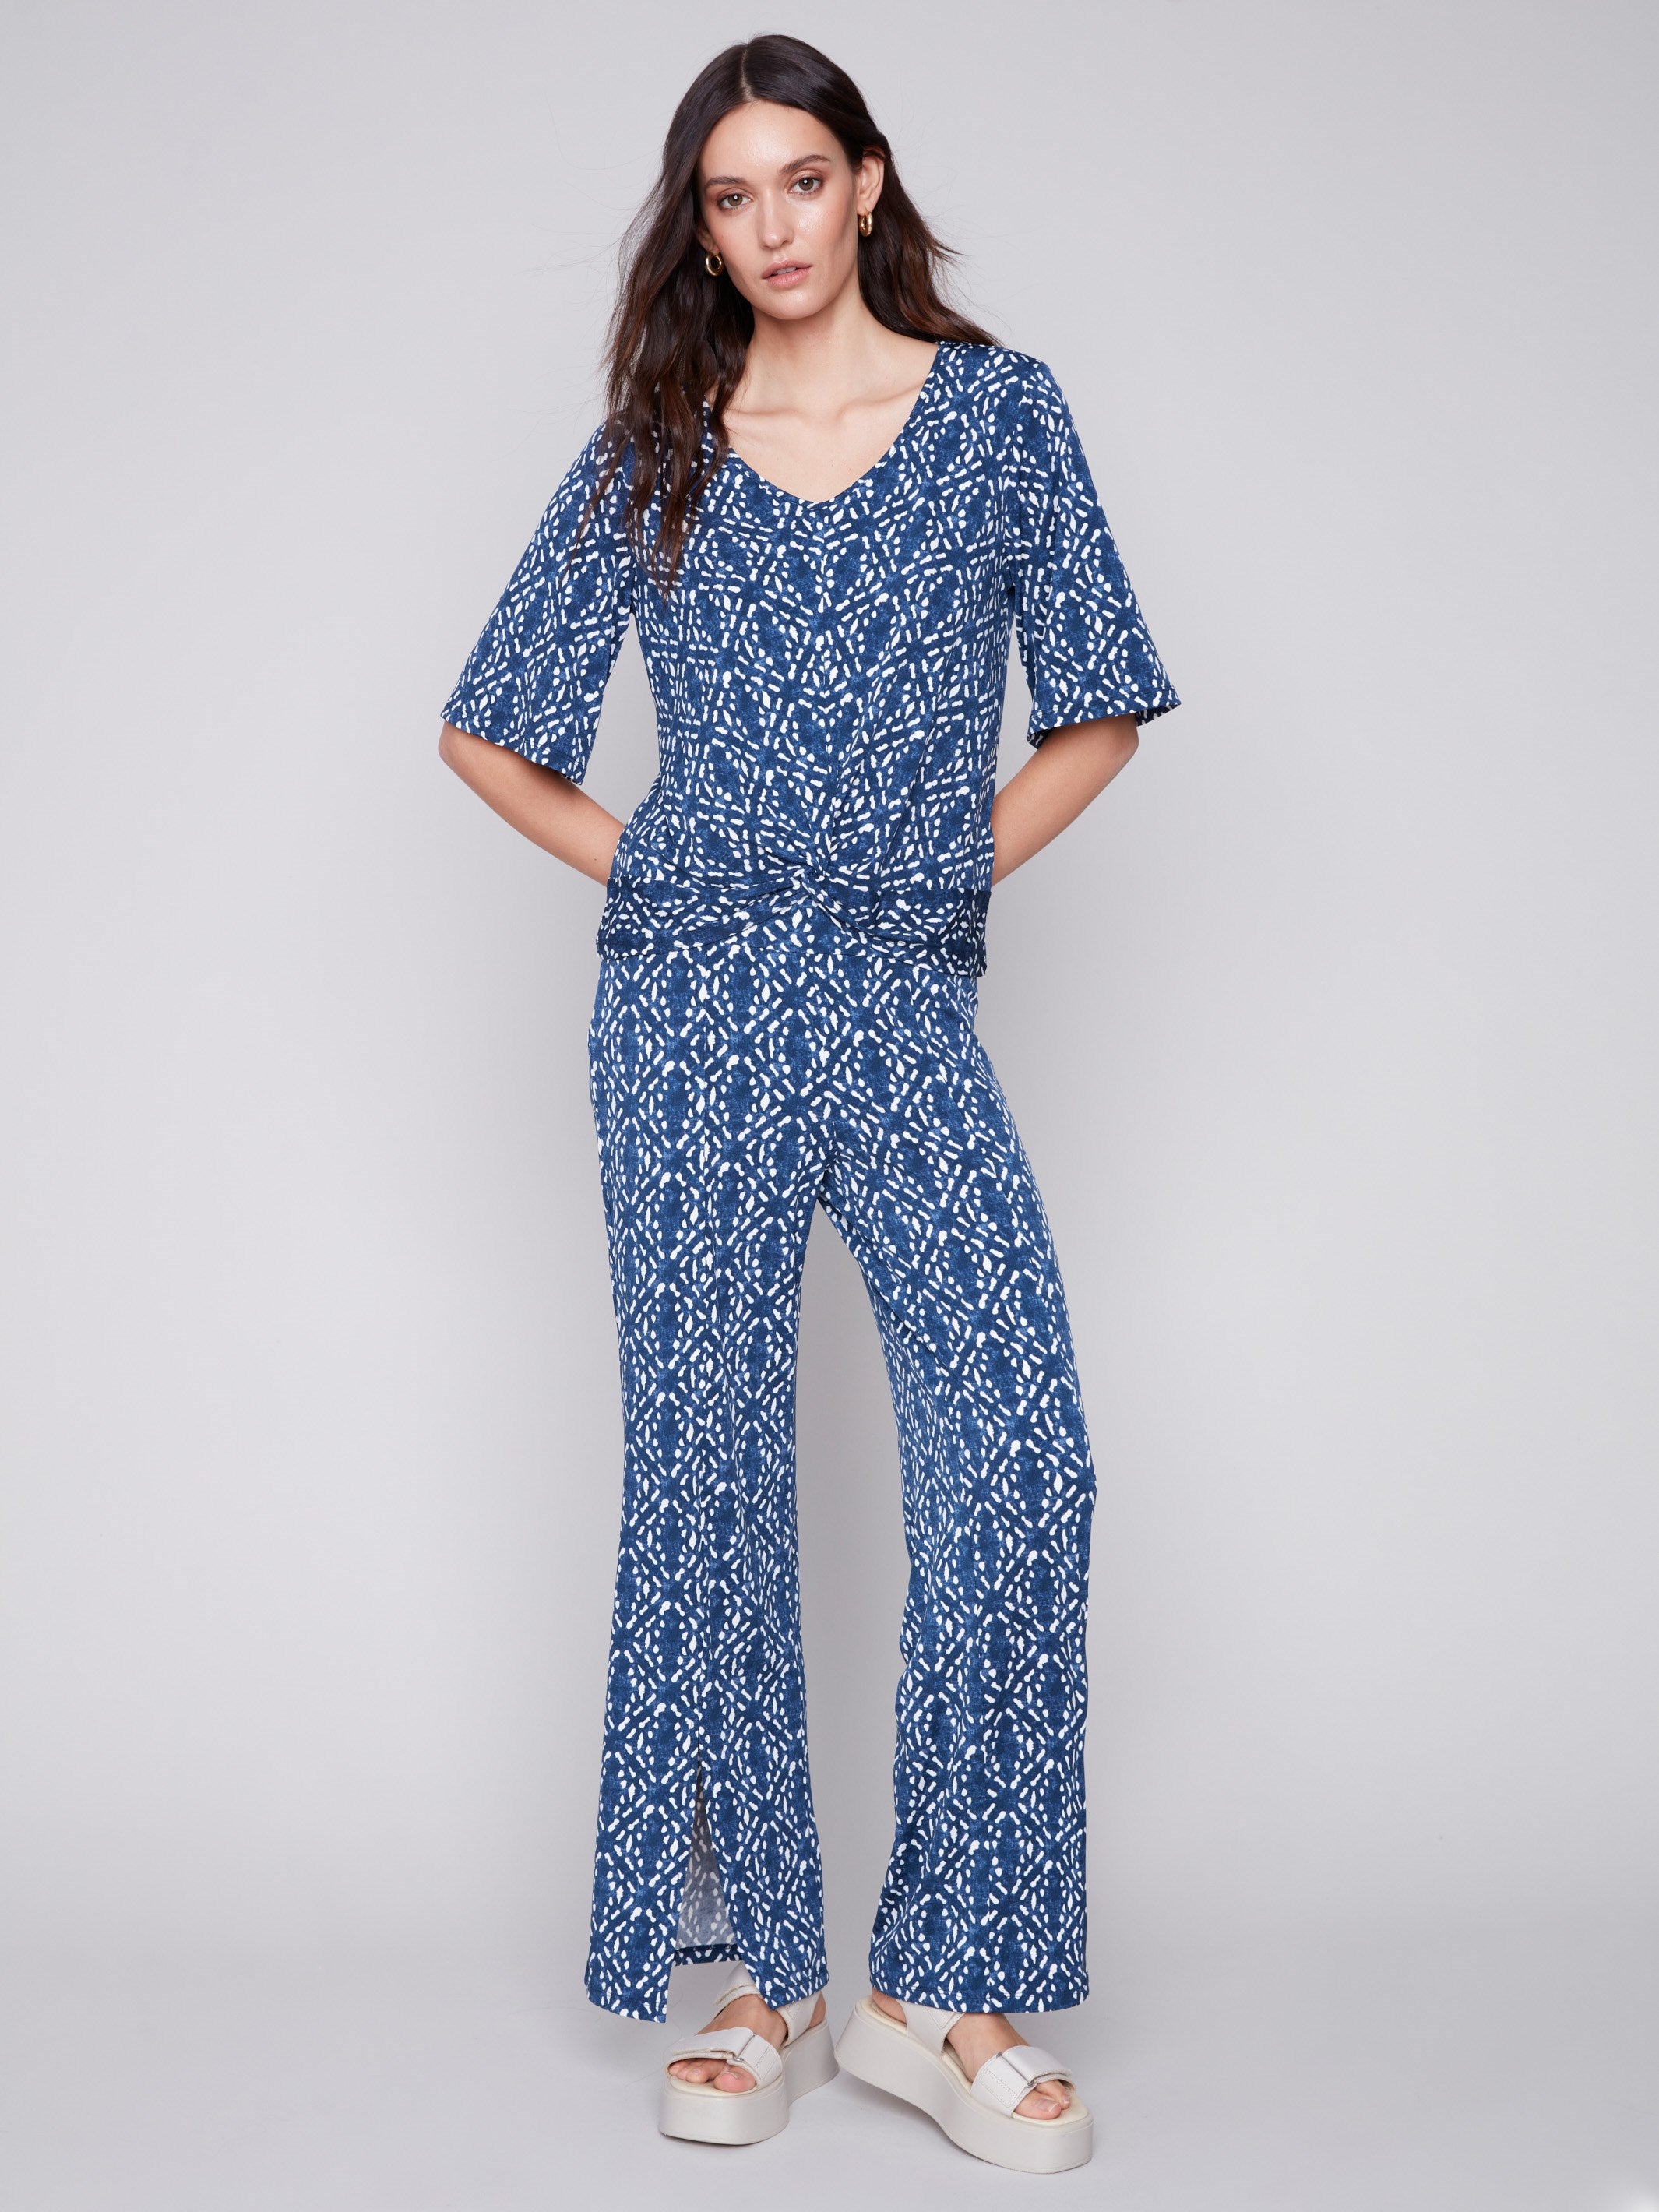 Short-Sleeved Printed Top with Front Knot - Indigo - Charlie B Collection Canada - Image 3